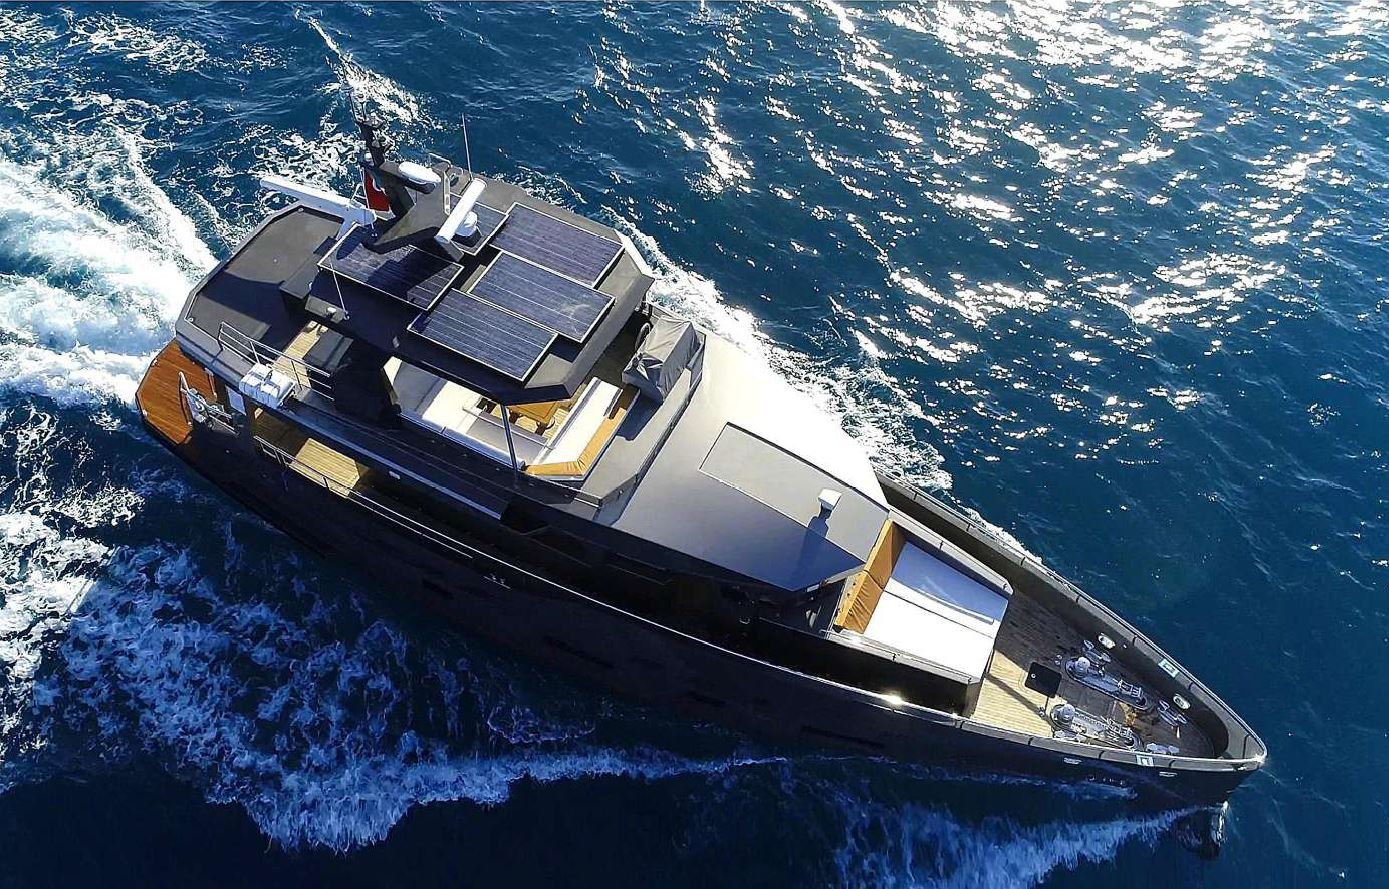 Bering motor yacht LIBERTY listed exclusively for sale with YACHTZOO